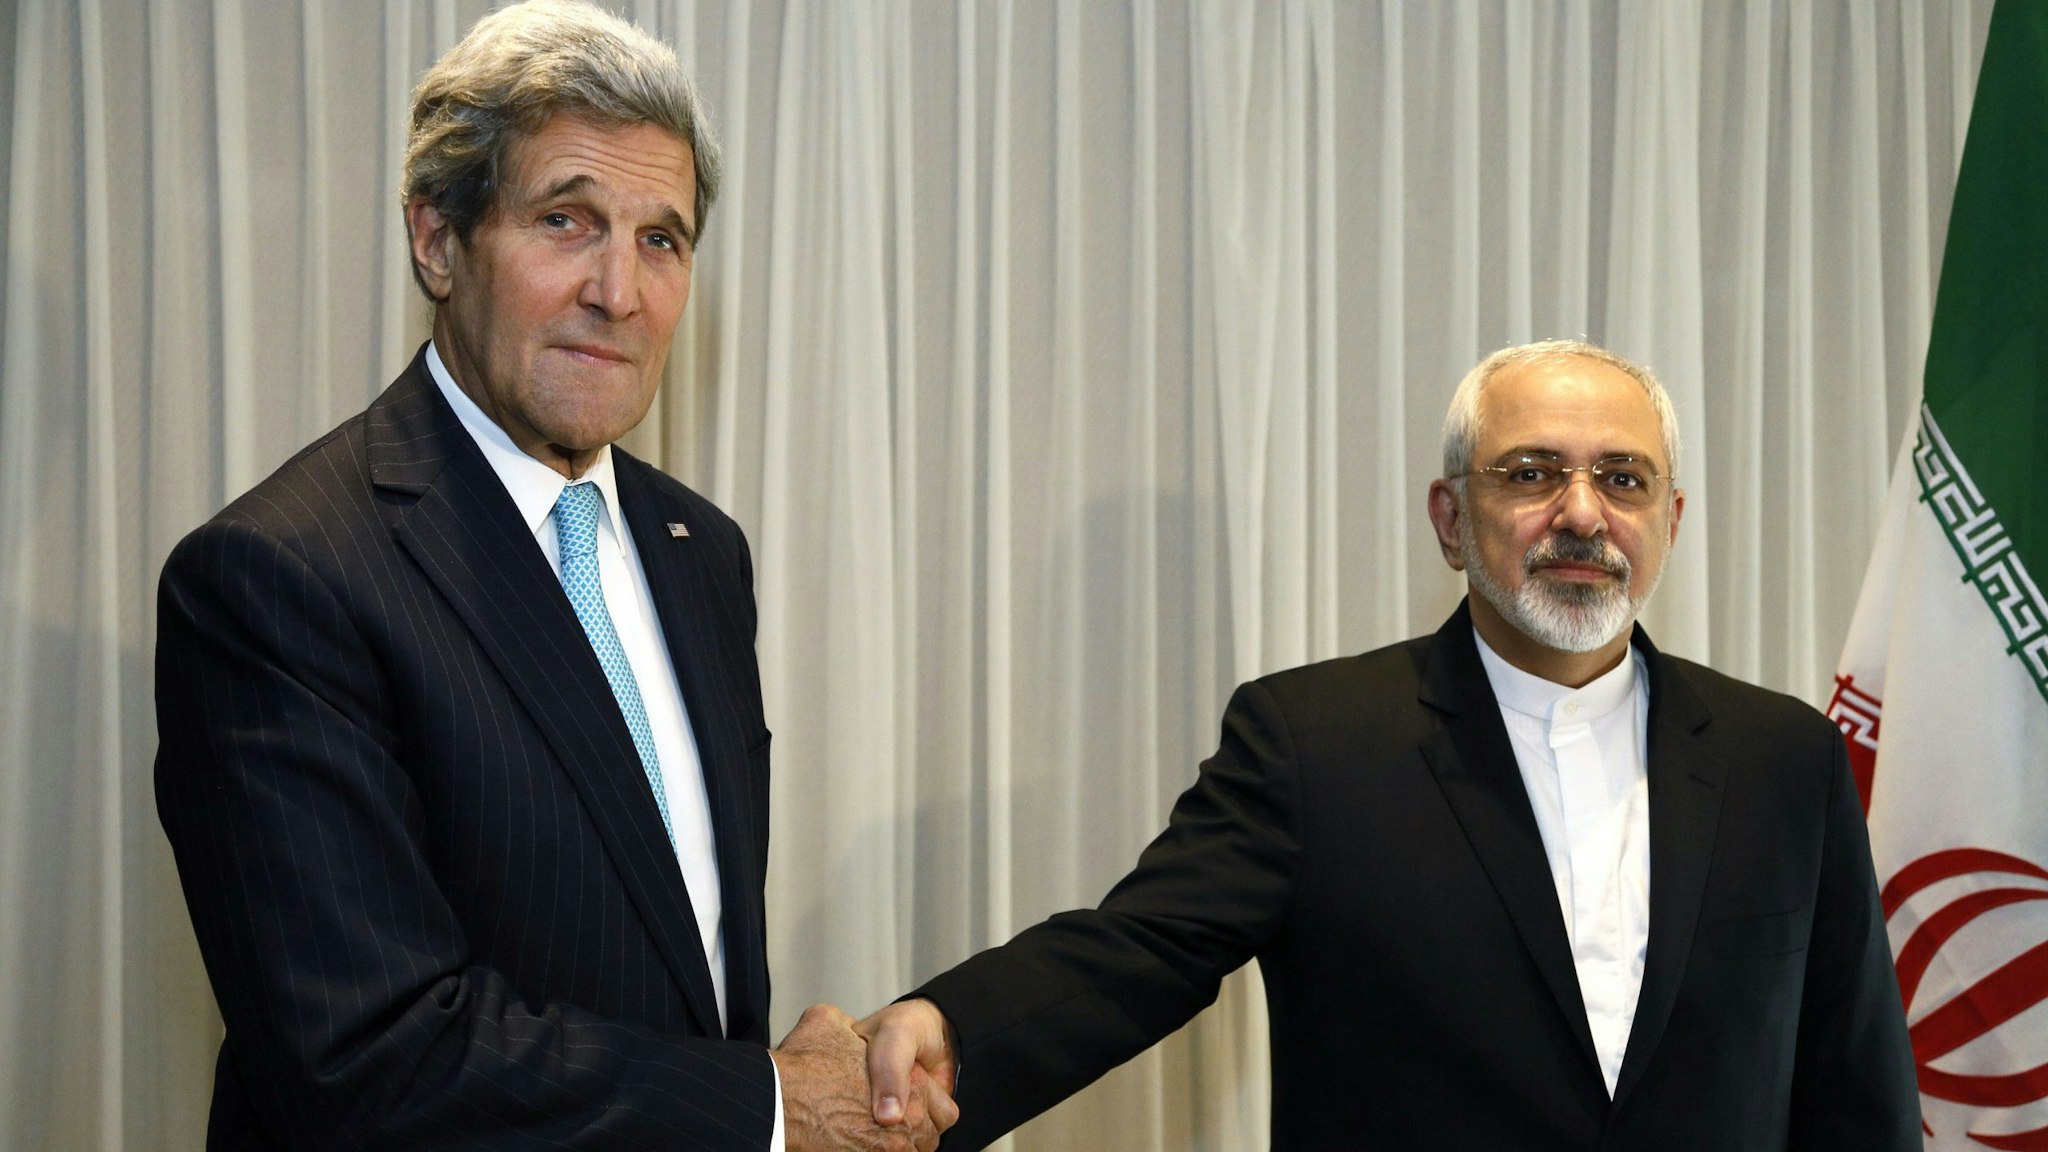 Iranian Foreign Minister Mohammad Javad Zarif shakes hands on January 14, 2015 with US State Secretary John Kerry in Geneva. Zarif said on January 14 that his meeting with his US counterpart was vital for progress on talks on Tehran's contested nuclear drive. Under an interim deal agreed in November 2013, Iran's stock of fissile material has been diluted from 20 percent enriched uranium to five percent, in exchange for limited sanctions relief.